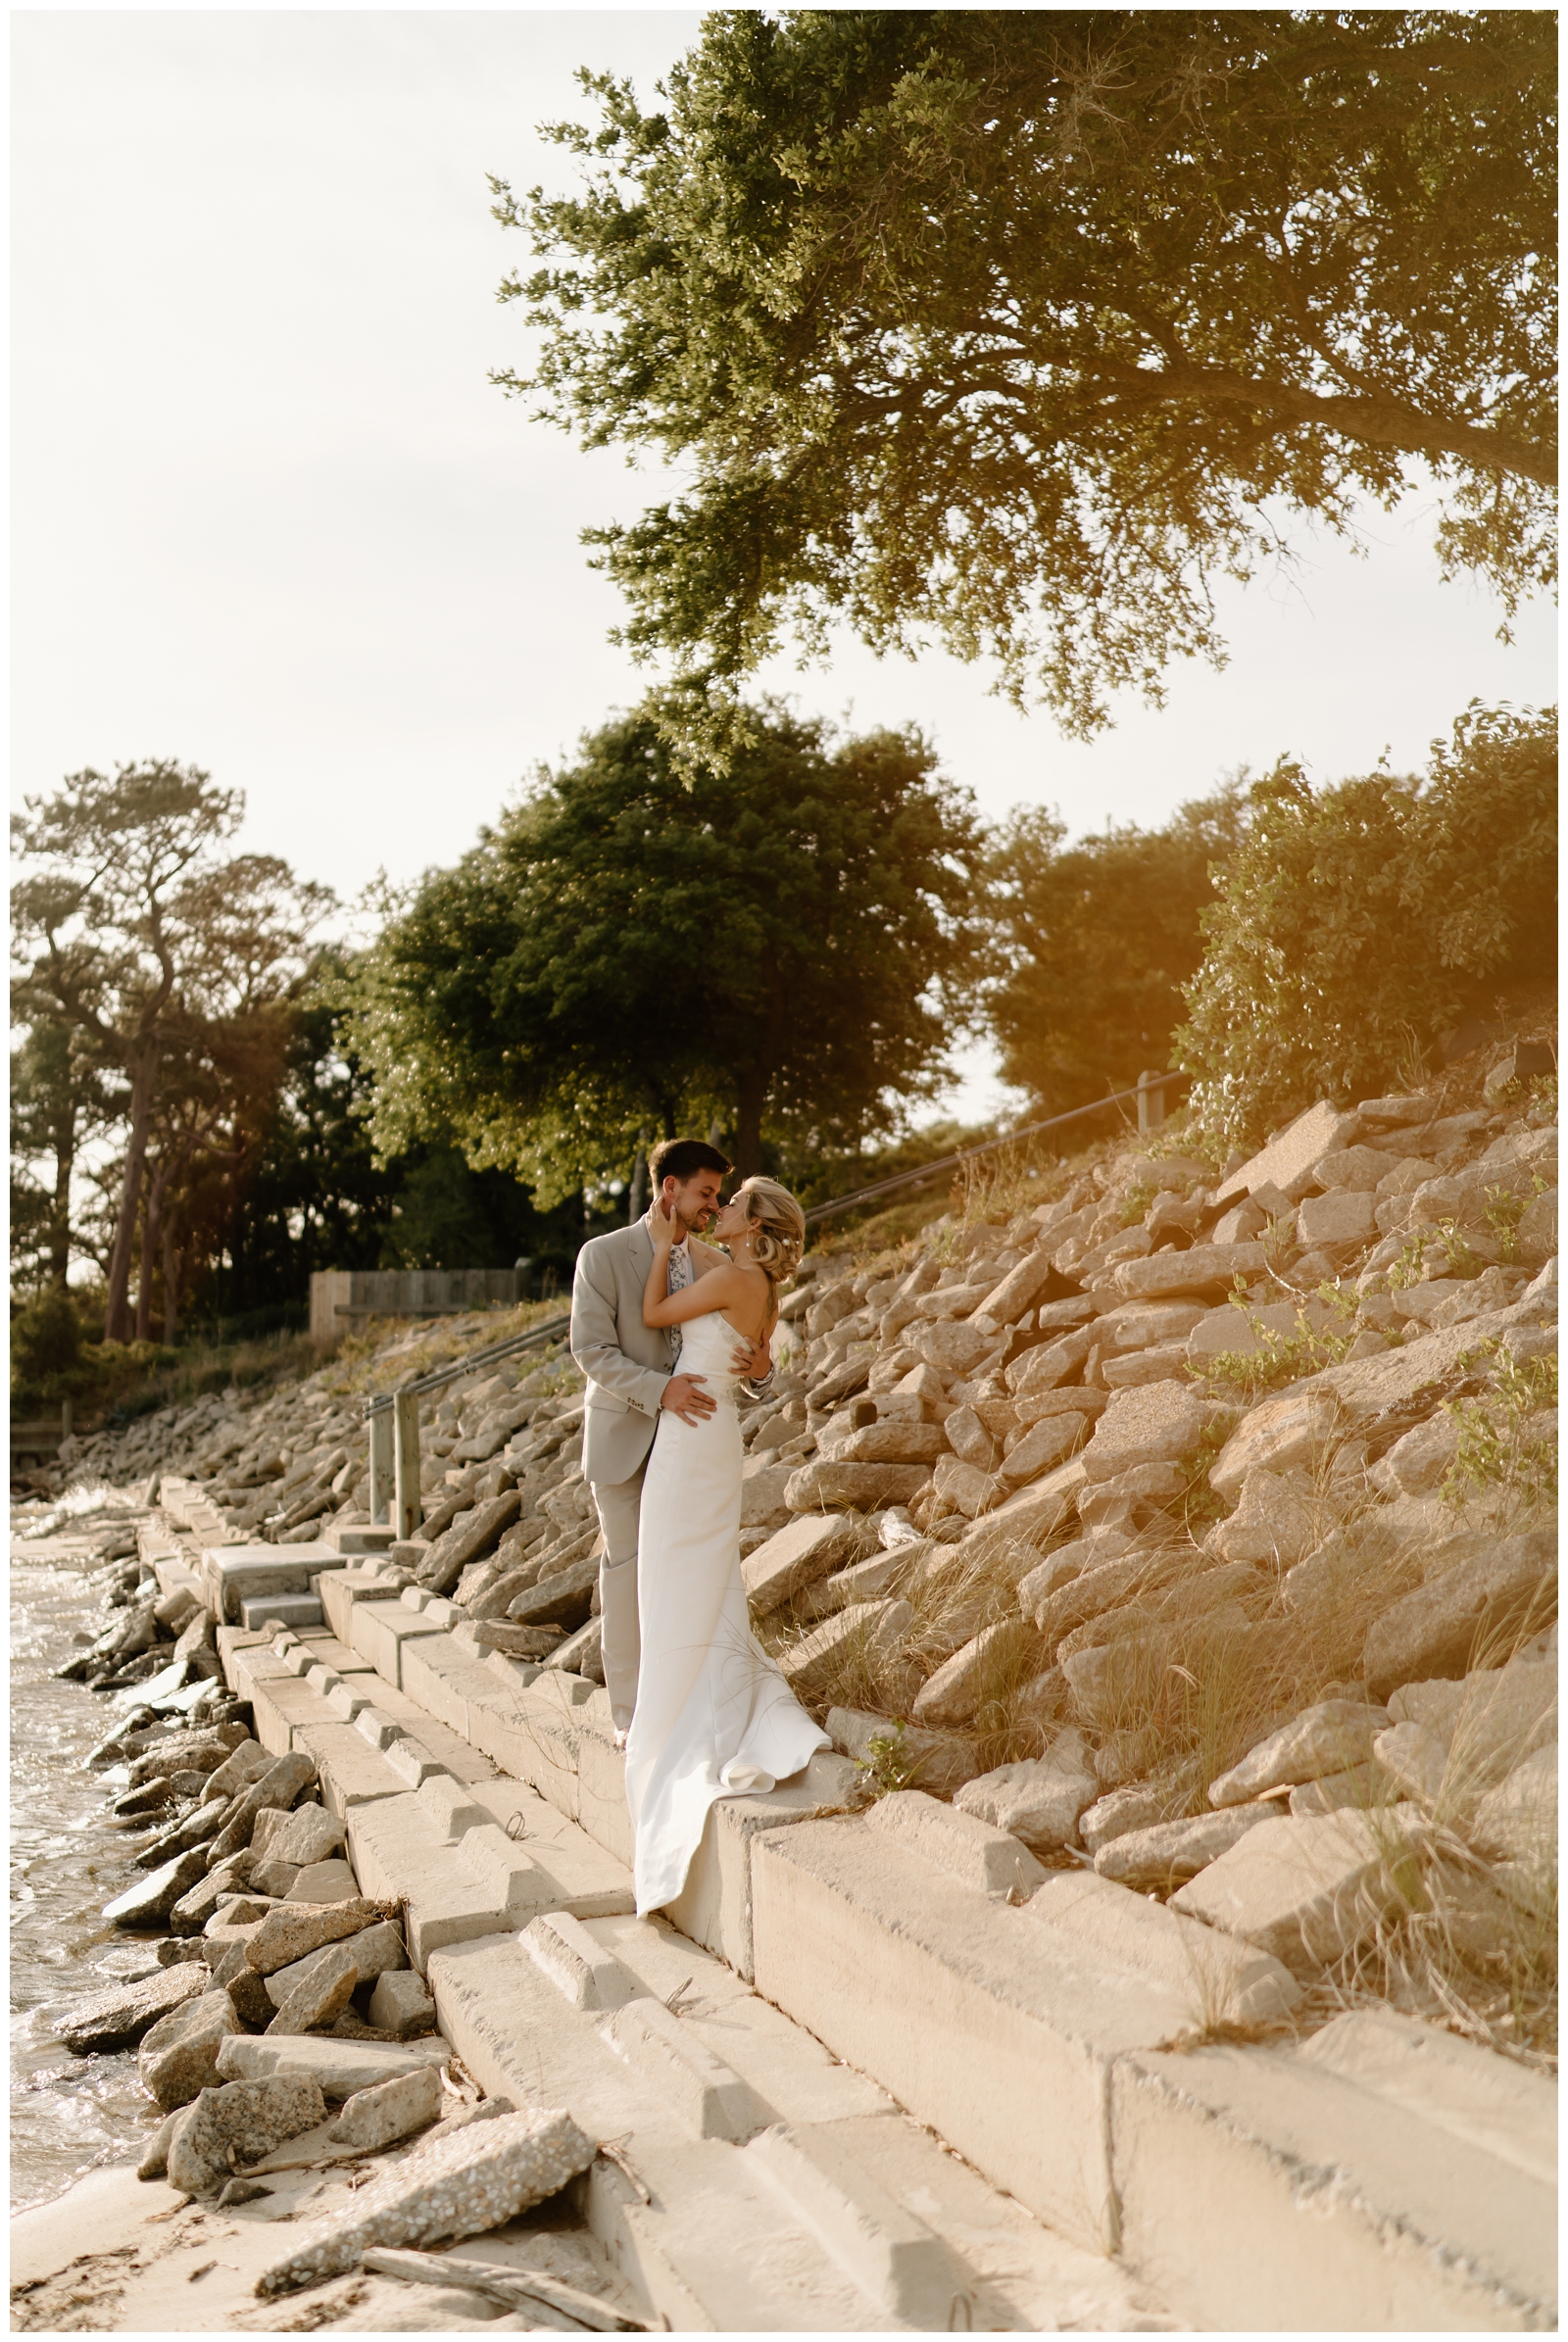 Stunning beach wedding portraits in the Outer Banks, NC elopement photographer